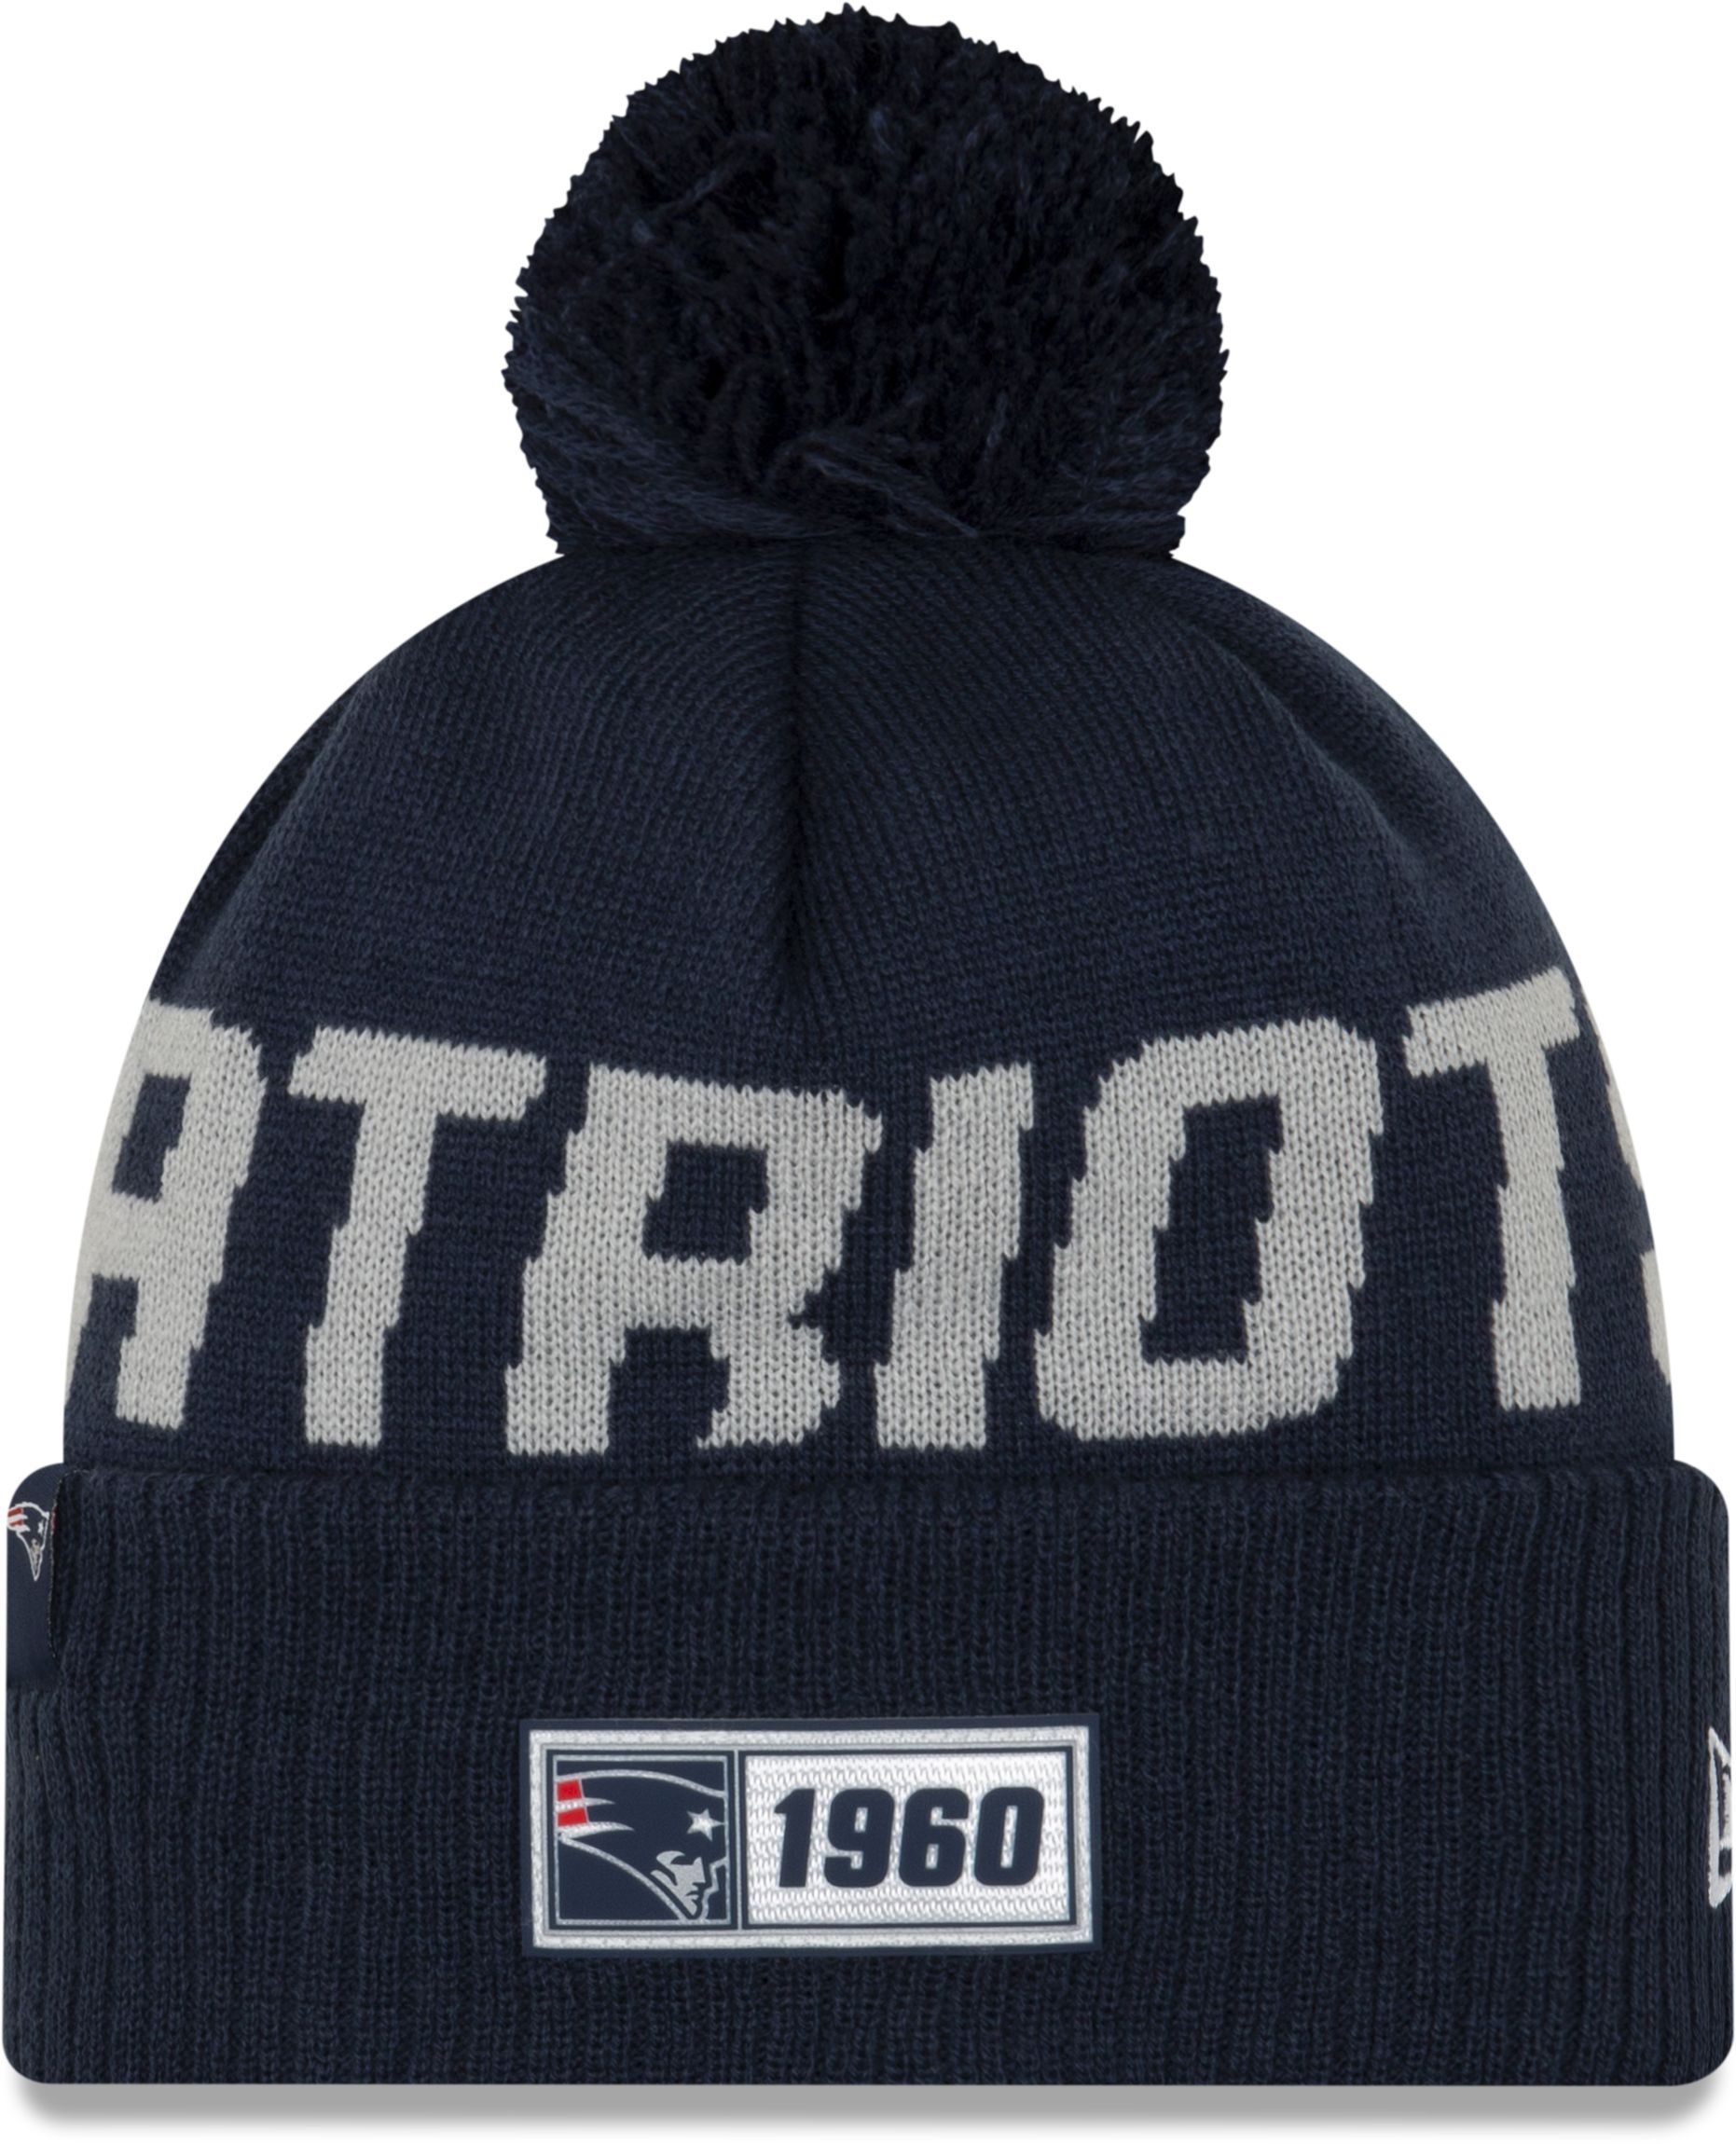 New Era ONF19 Cold Weather New England Patriots Bobble Beanie Hat